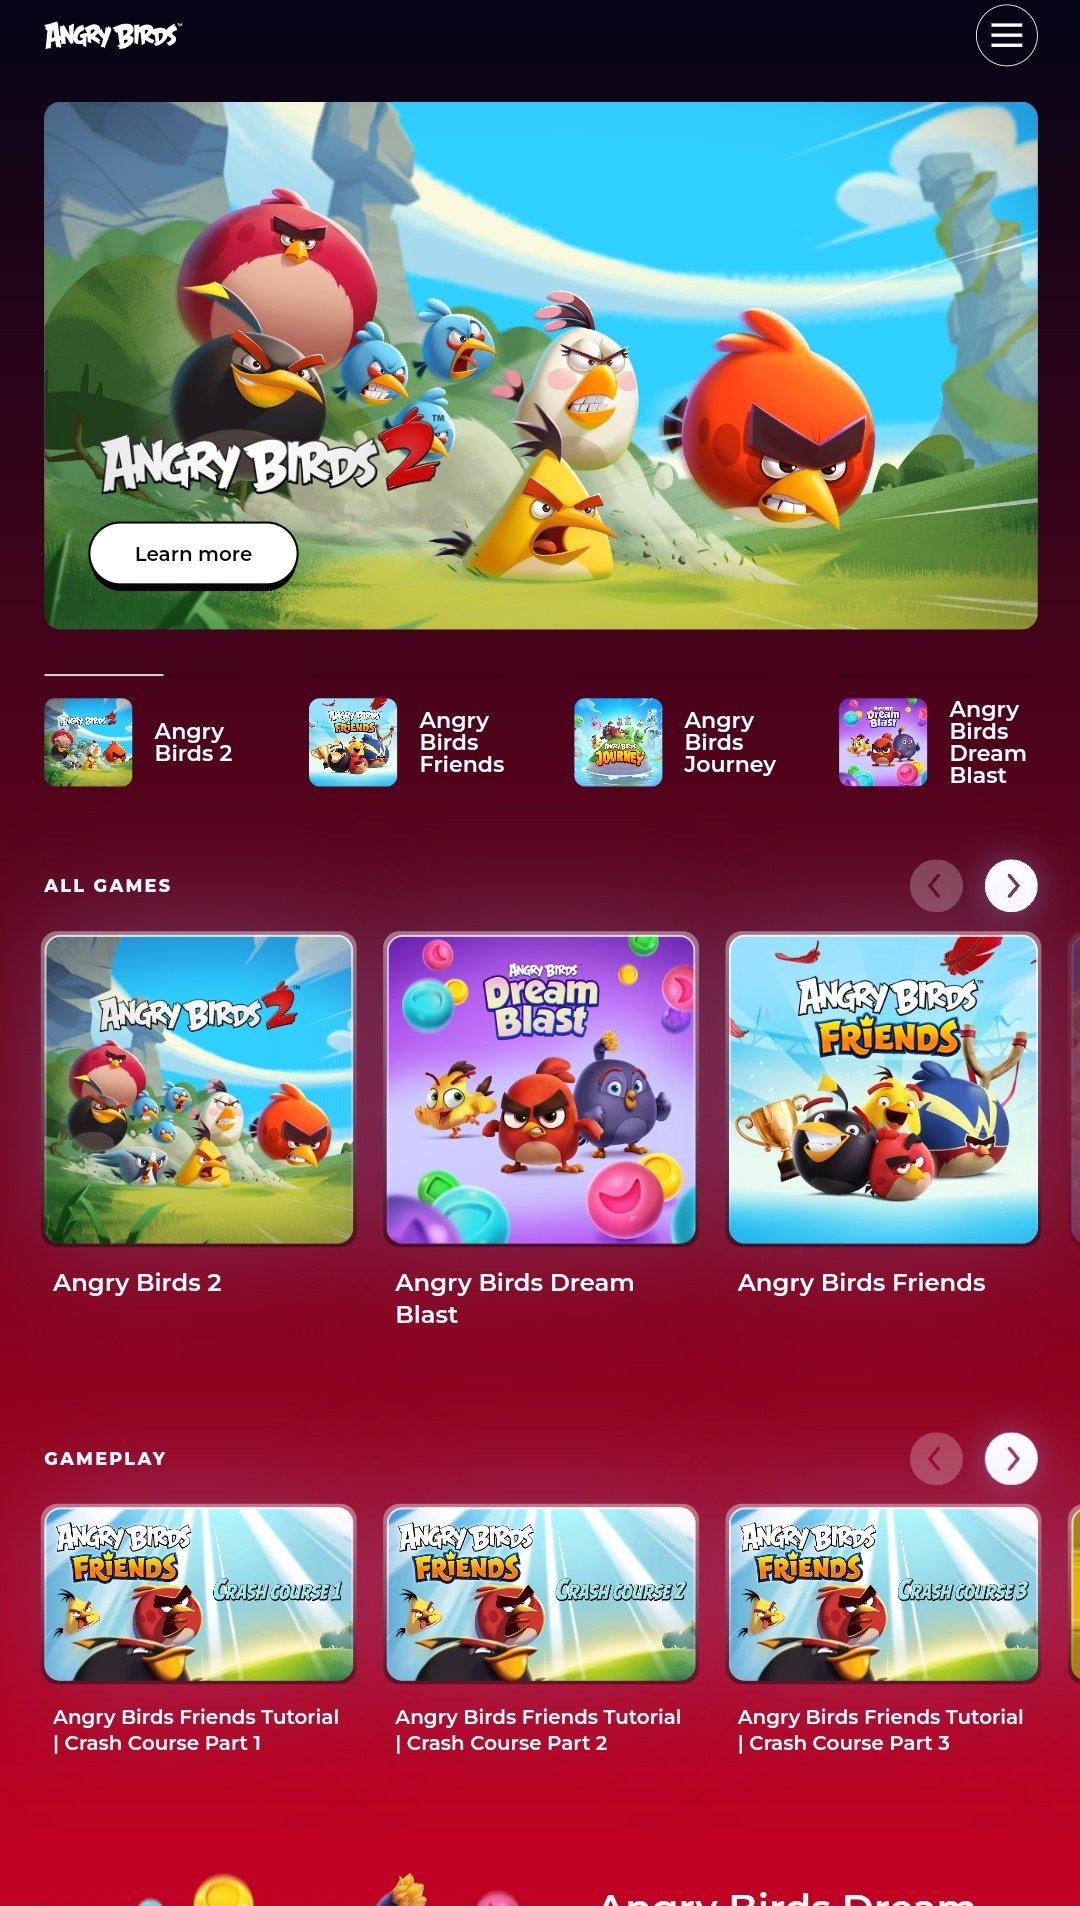 Angry Birds Facts • It's almost time on X: Fact #2989: Angry Birds 2 has  two new app icons on the Google Play store in some regions. The first one  resembles